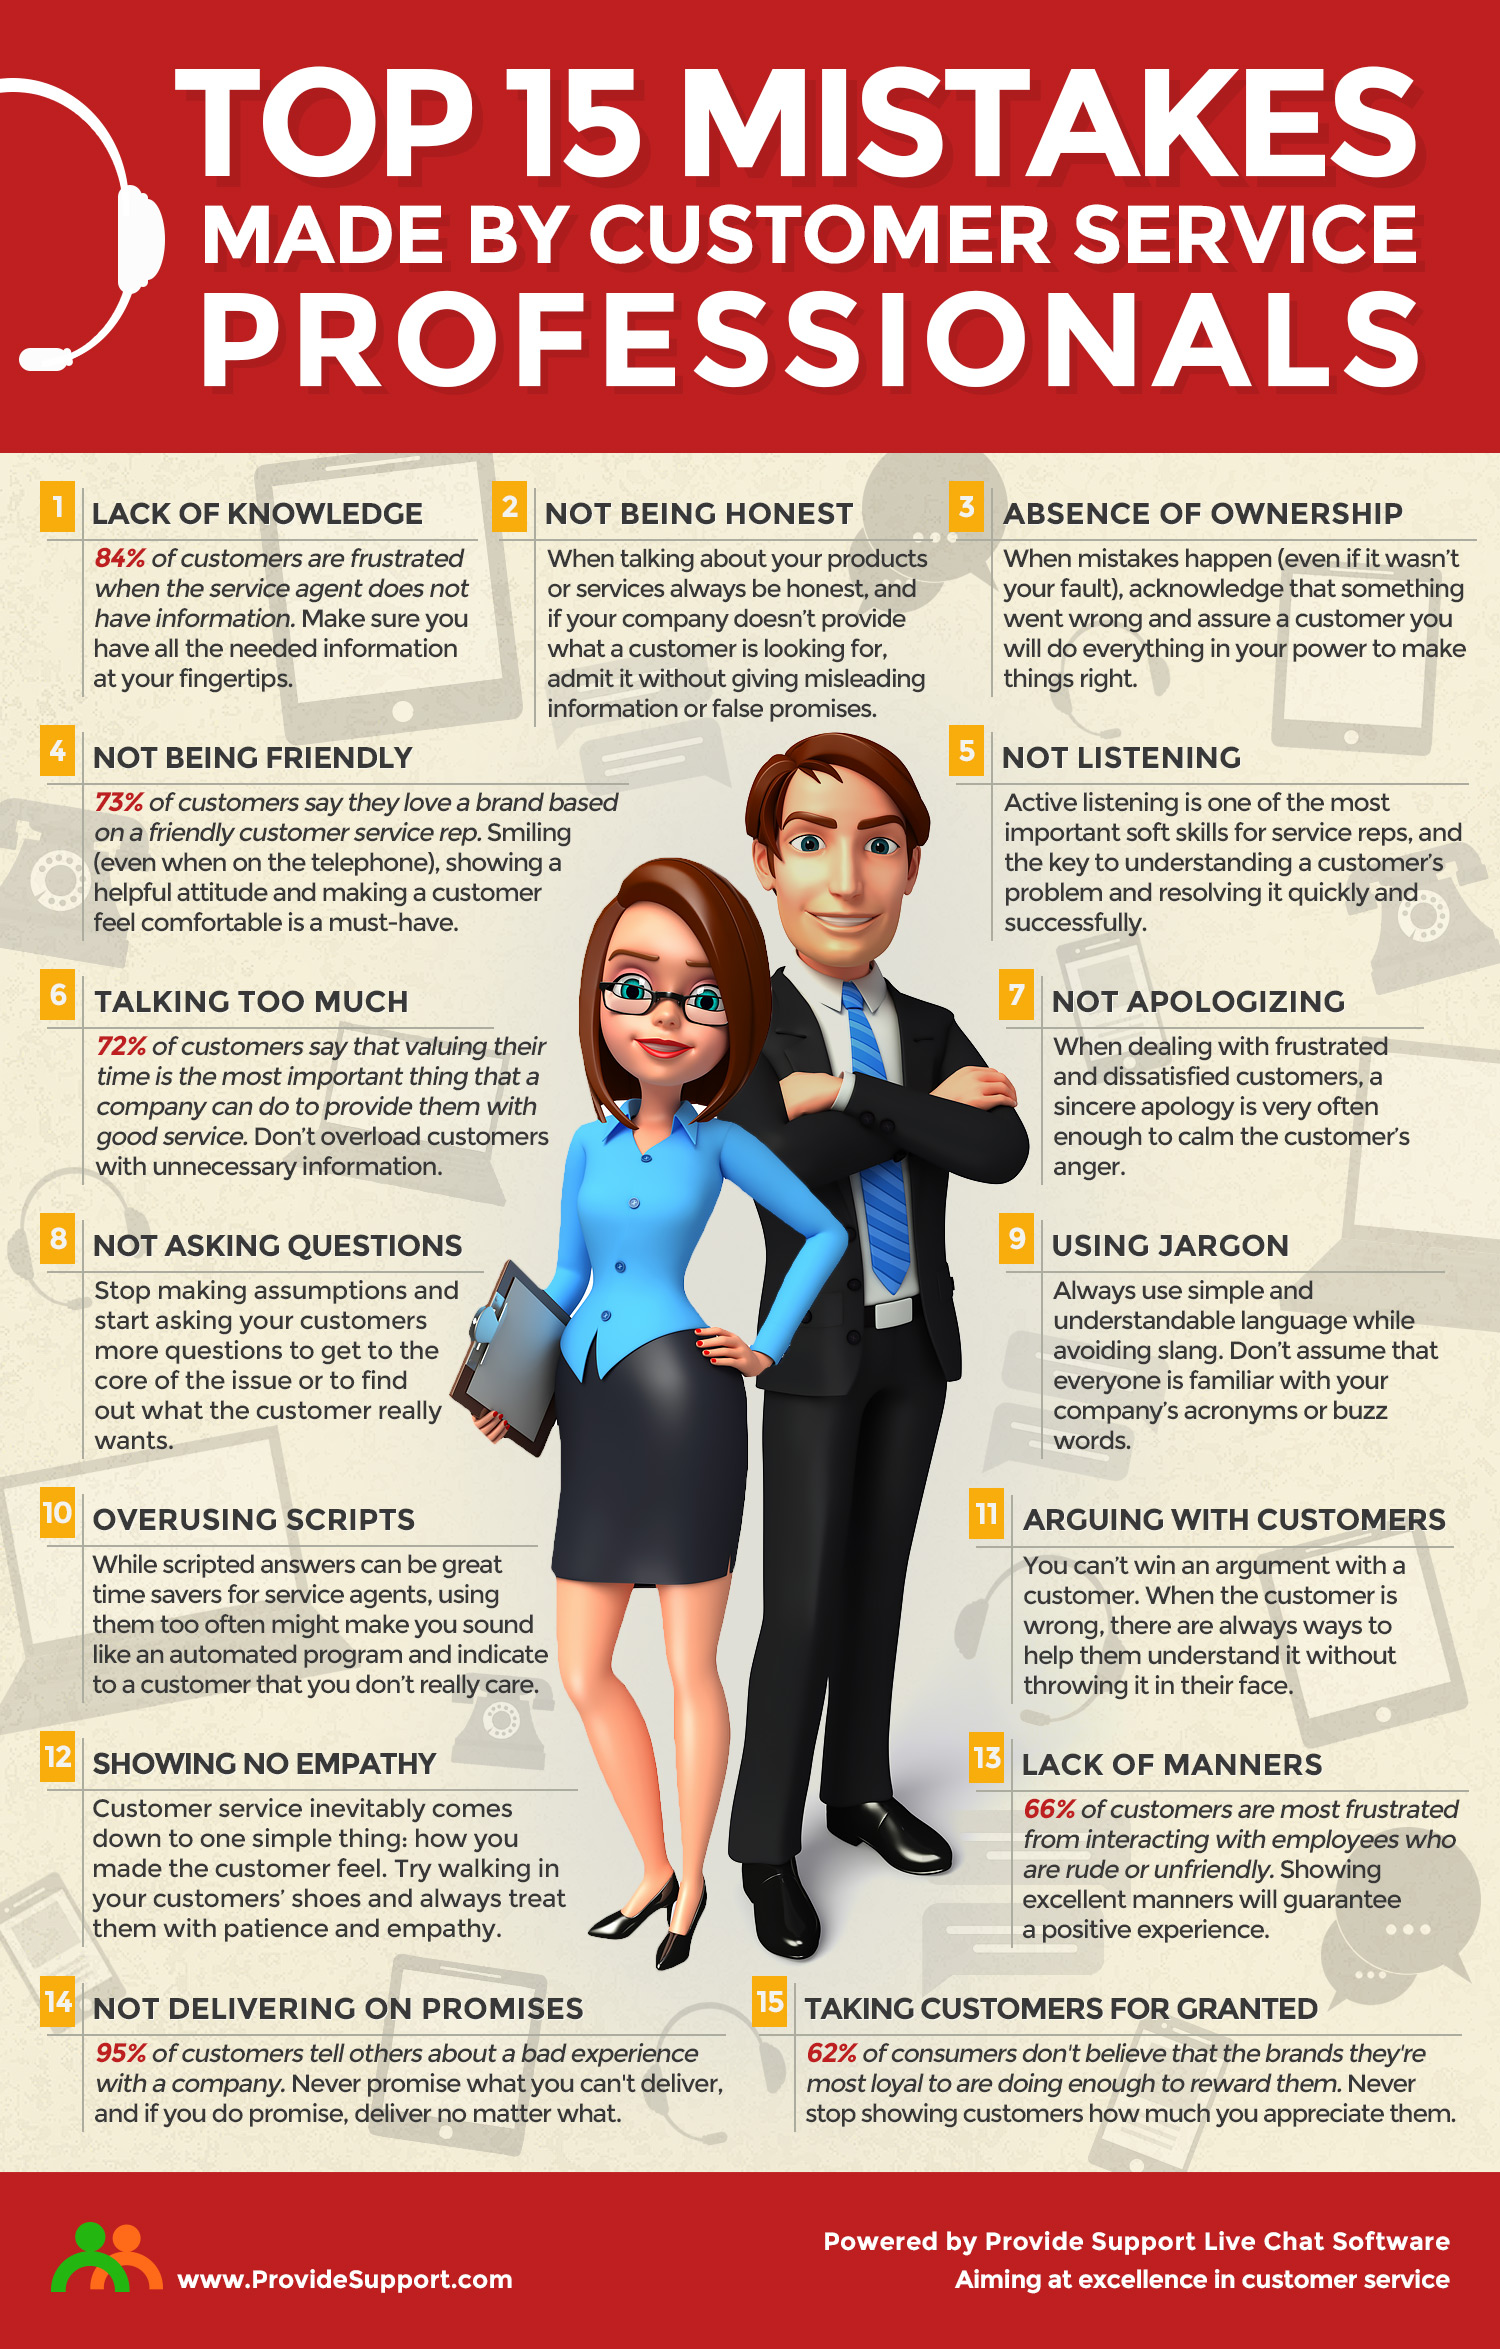 Top 15 Mistakes Made By Customer Service Professionals